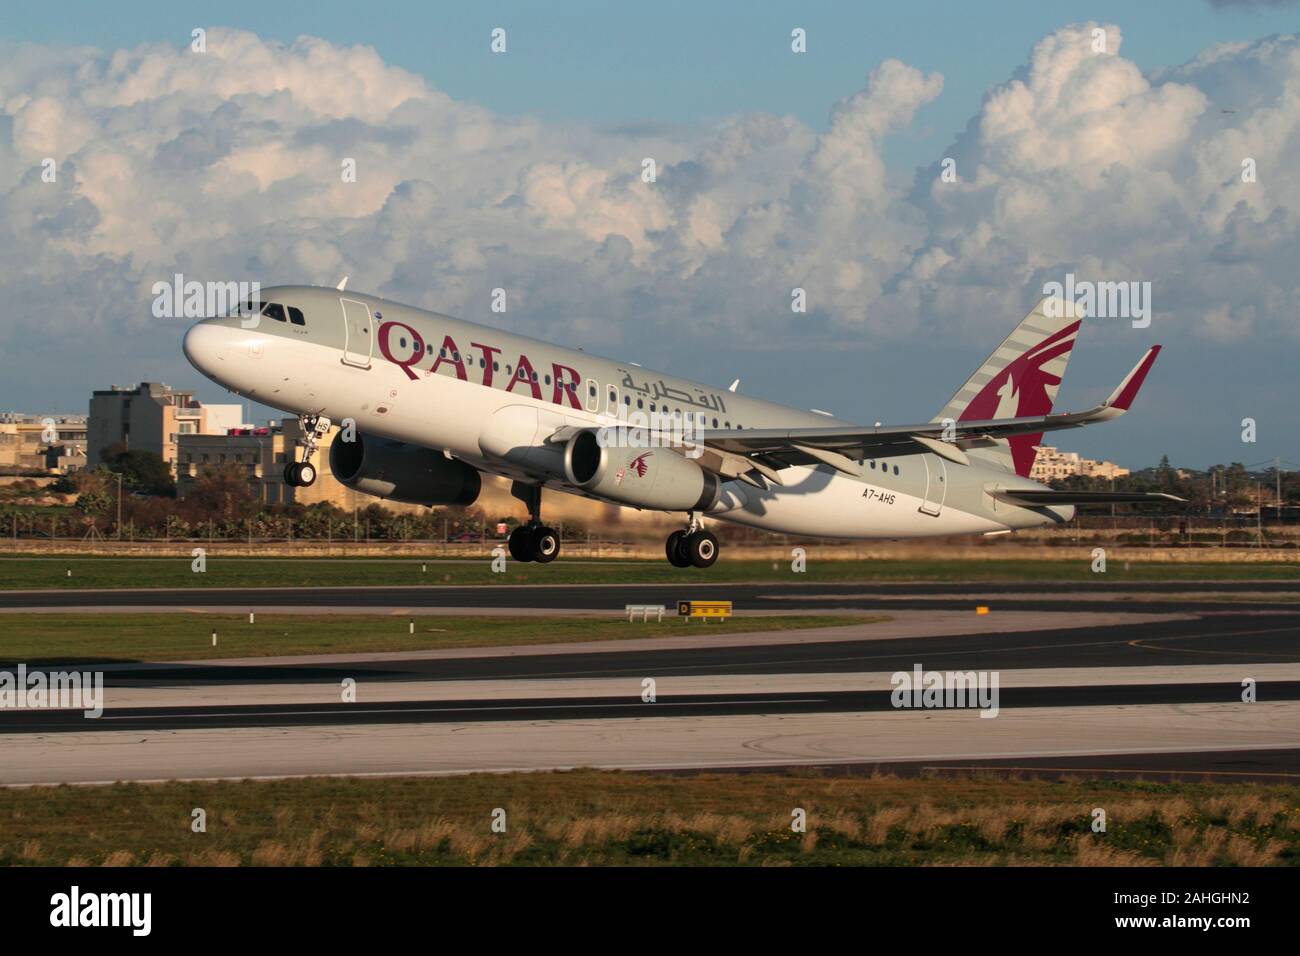 Qatar Airways Airbus A320-200 passenger jet plane taking off from the runway at Malta International Airport. Modern air travel and commercial flight. Stock Photo